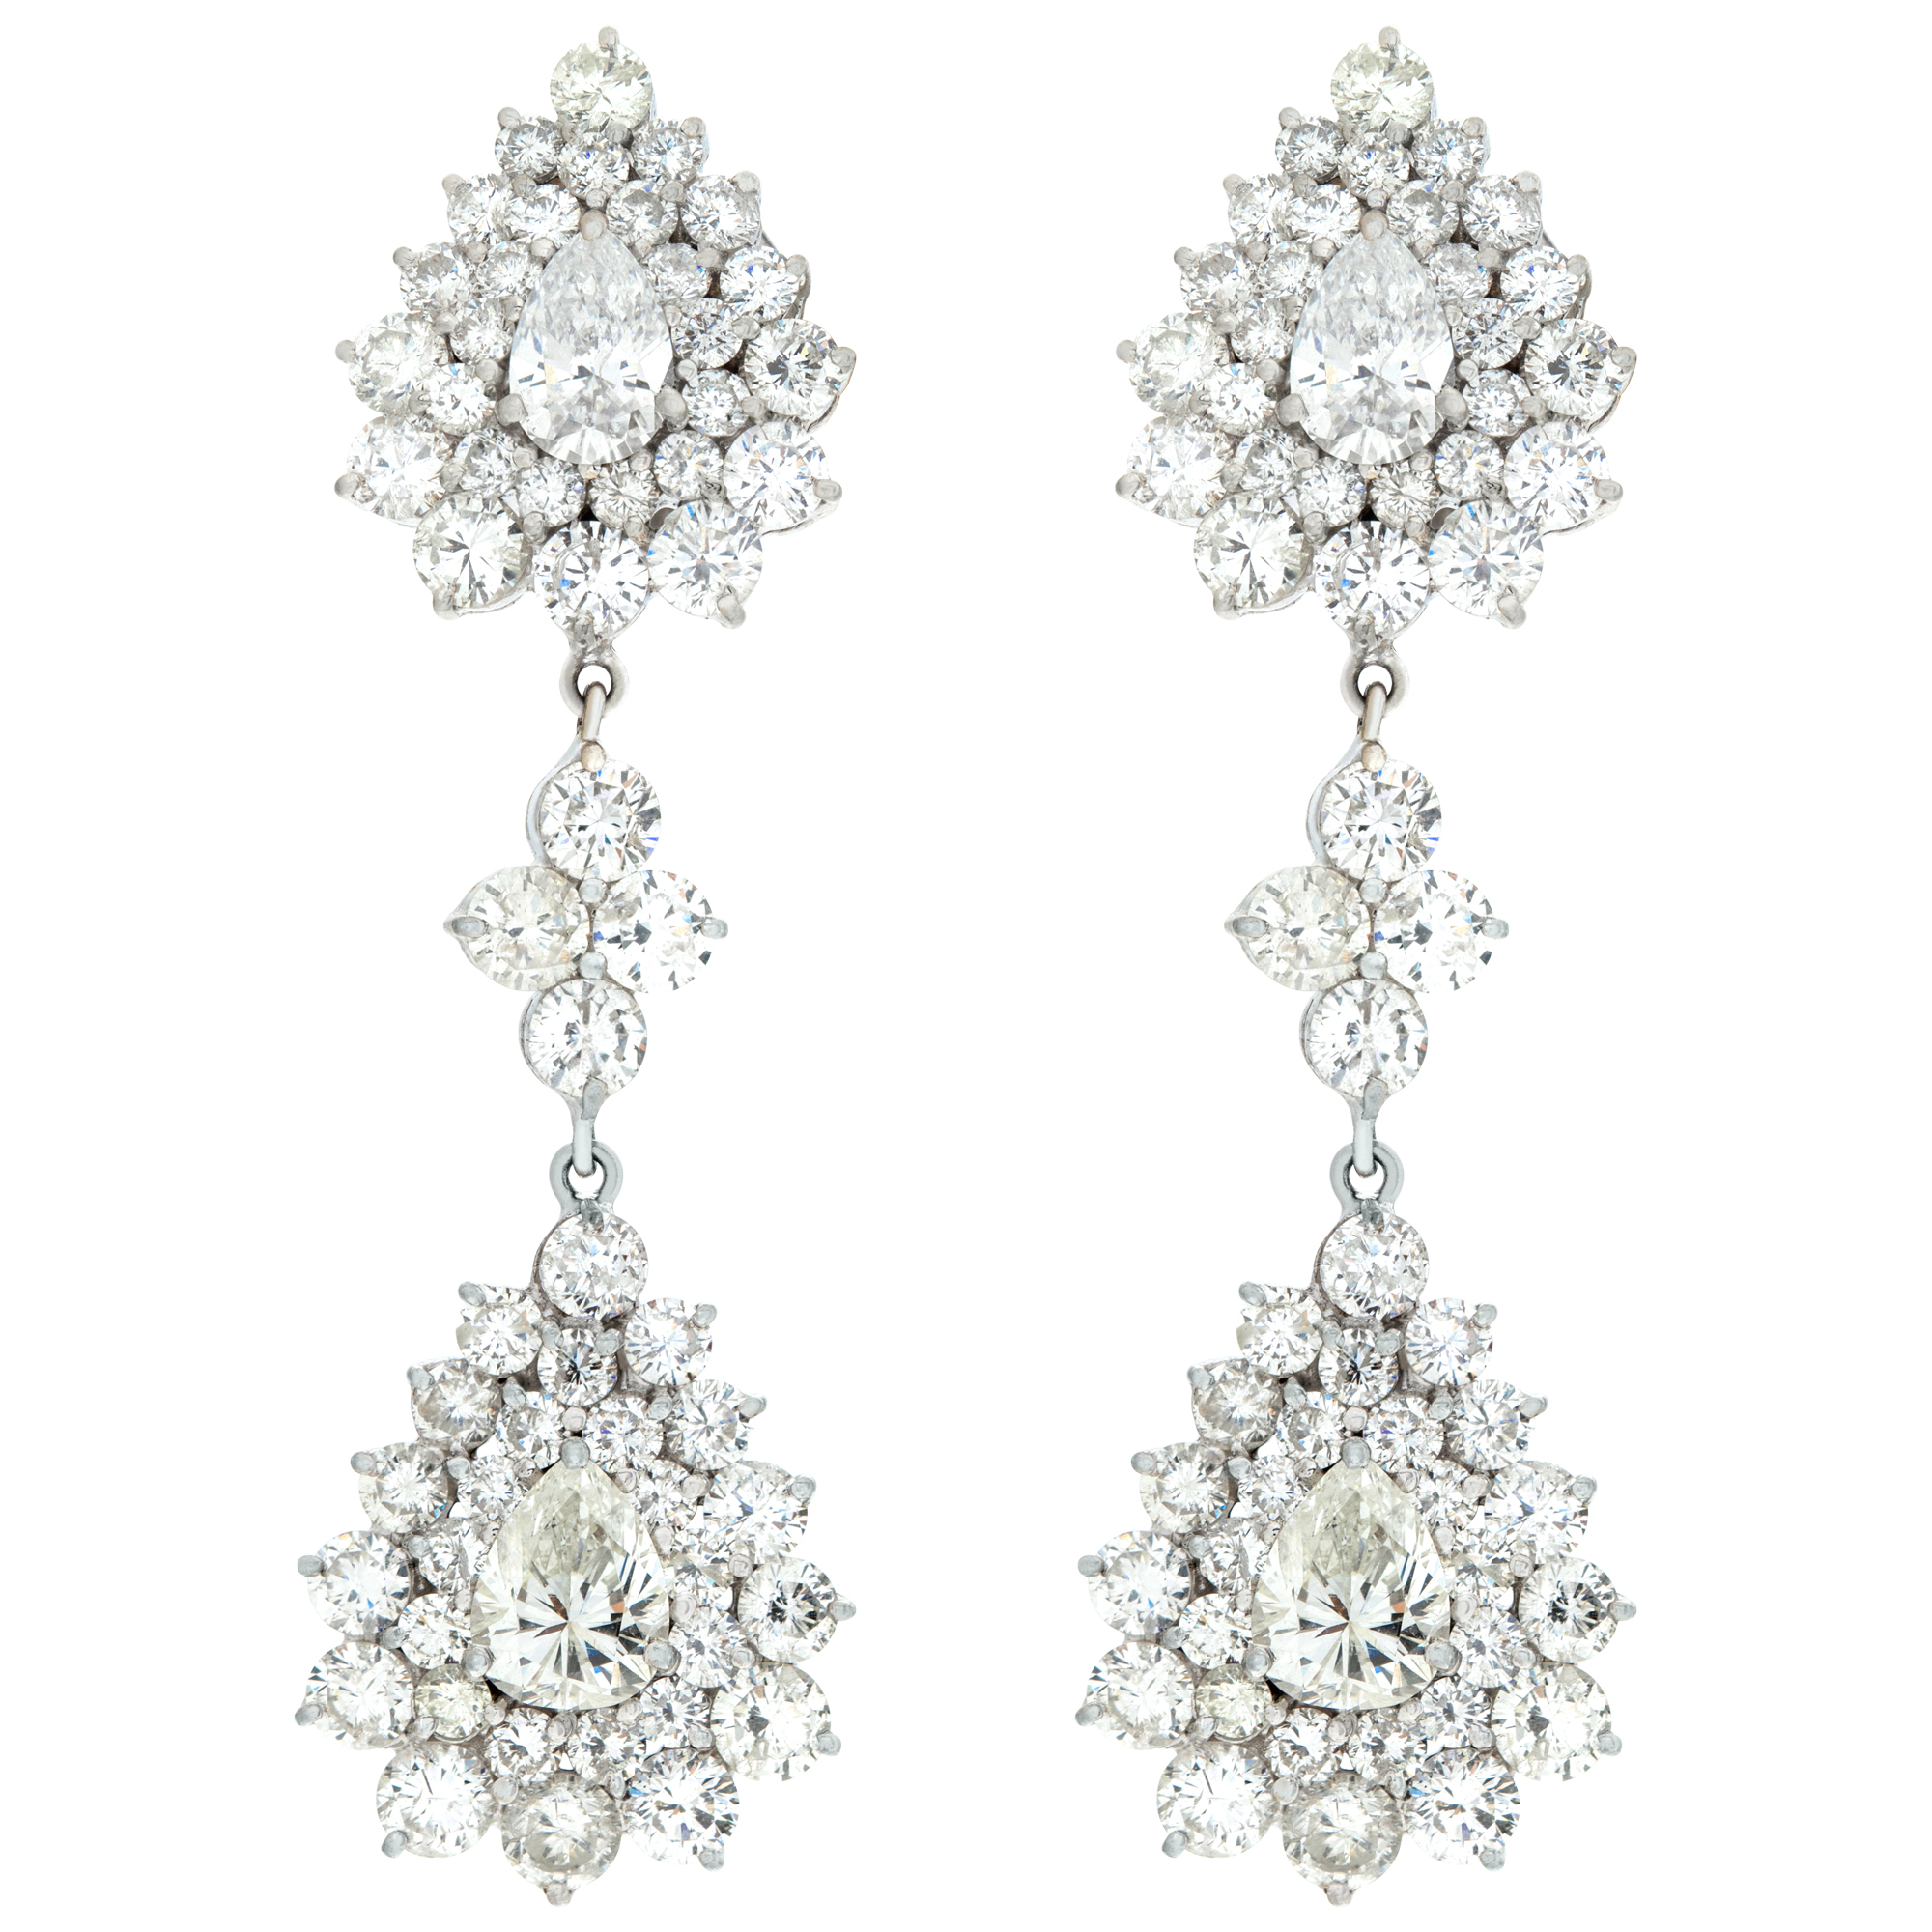 Stunning 18k white gold drop earrings with 10.31 carats in round and pear cut diamonds image 1